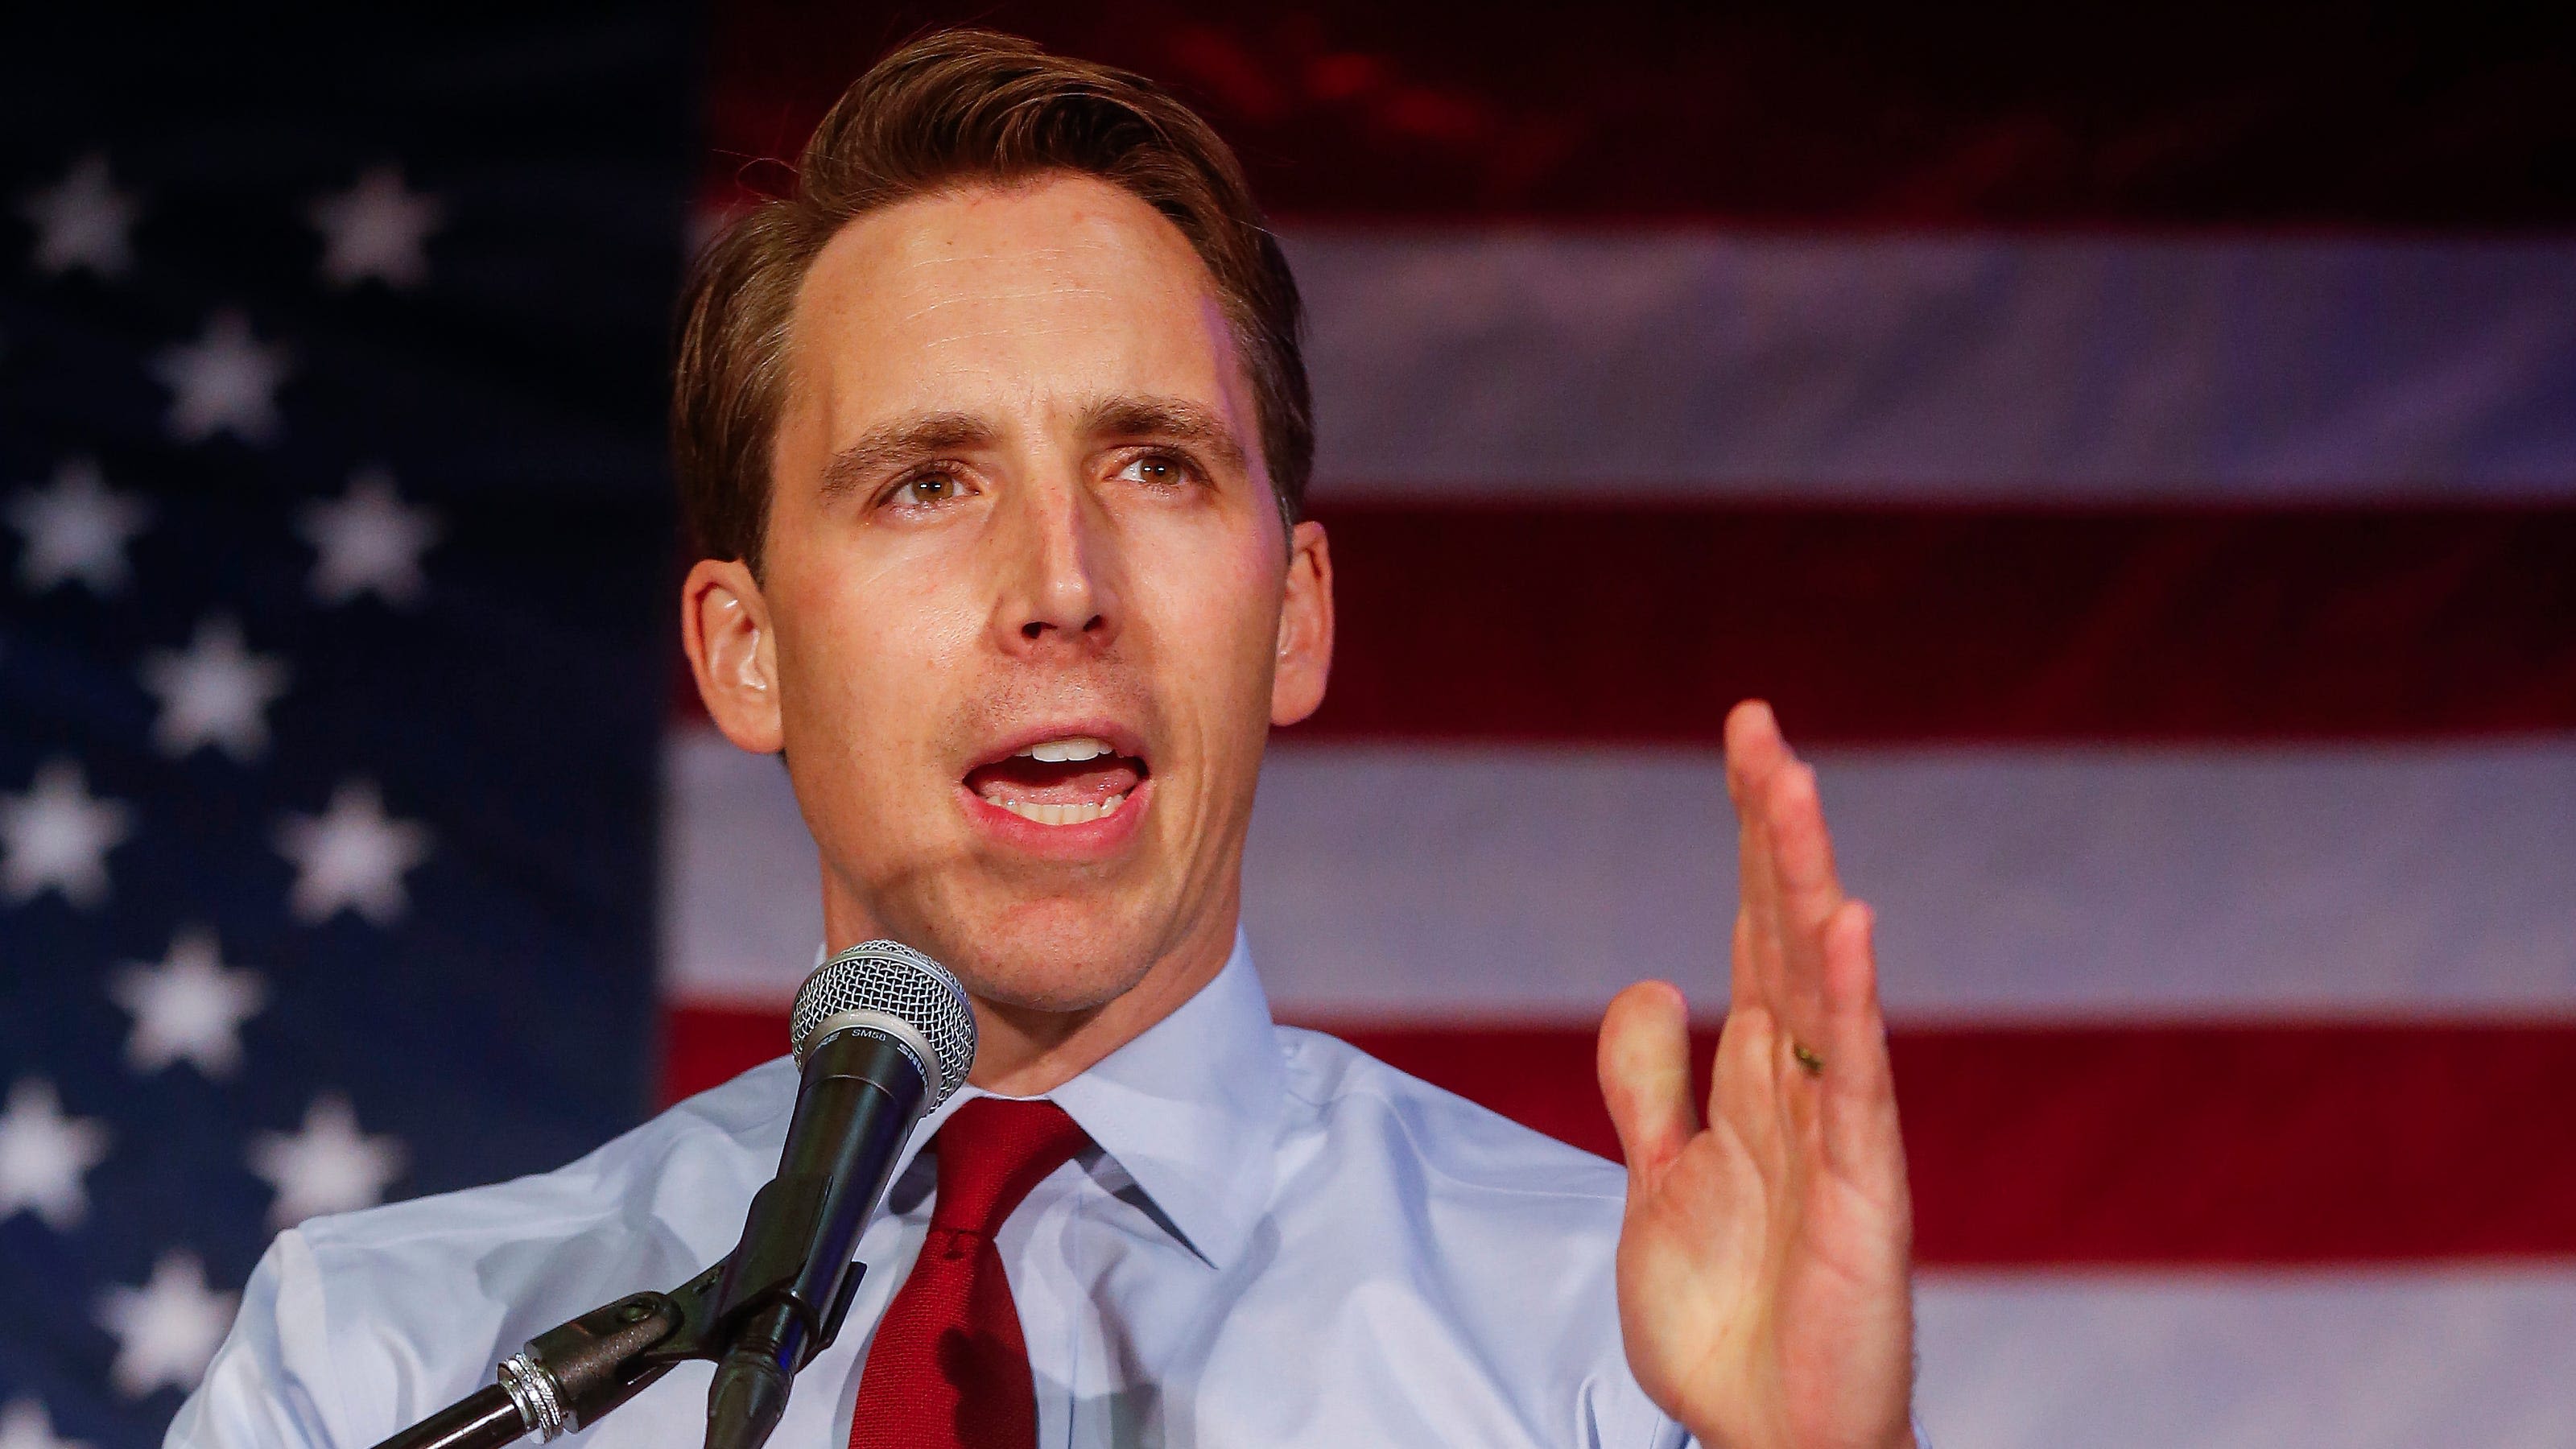 Josh Hawley's Senate seat is up for election. Here's who's running